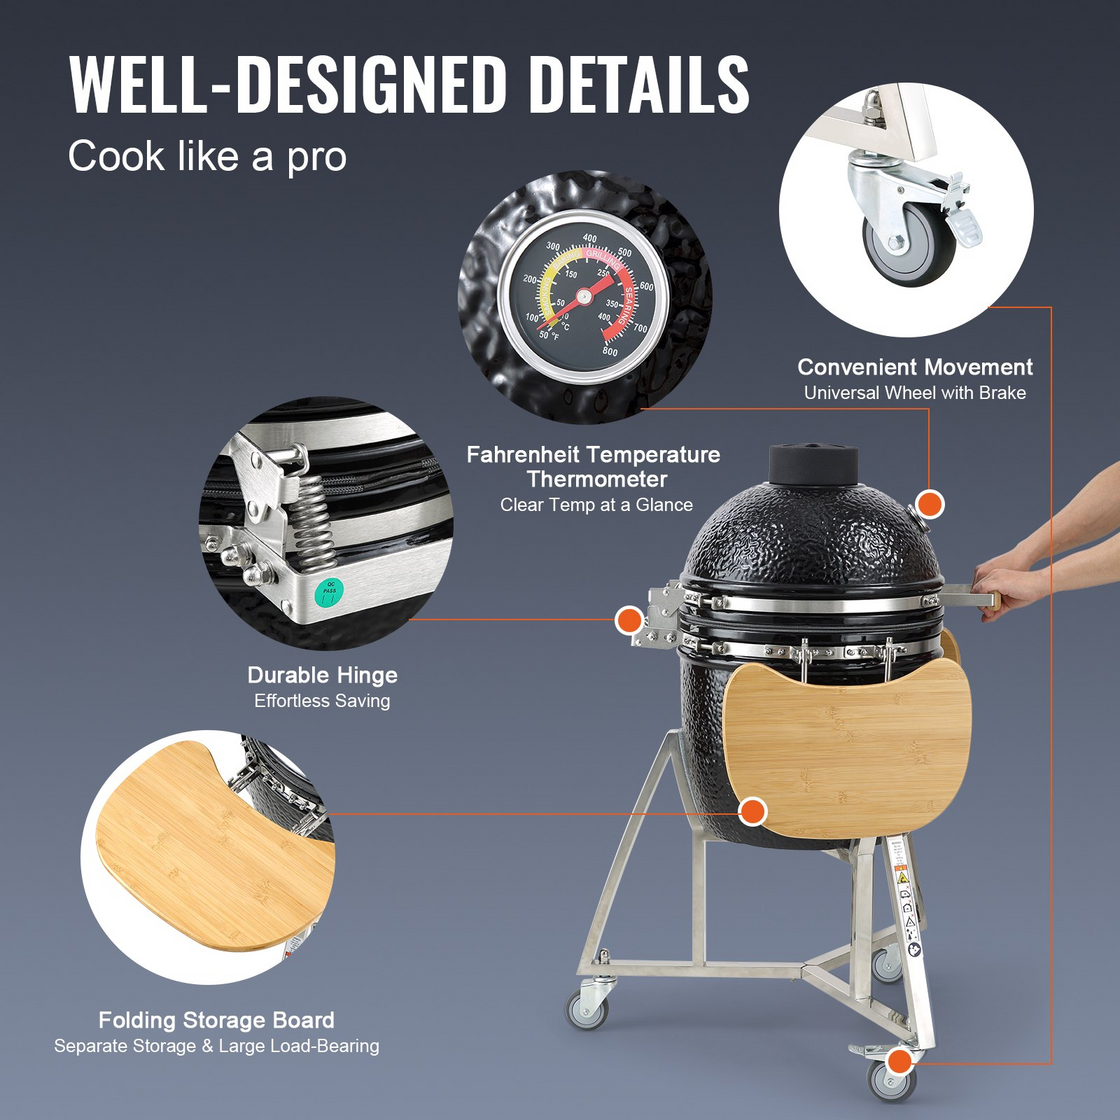 VEVOR 18" Ceramic Barbecue Grill Smoker Portable Round Outdoor Grill for Patio